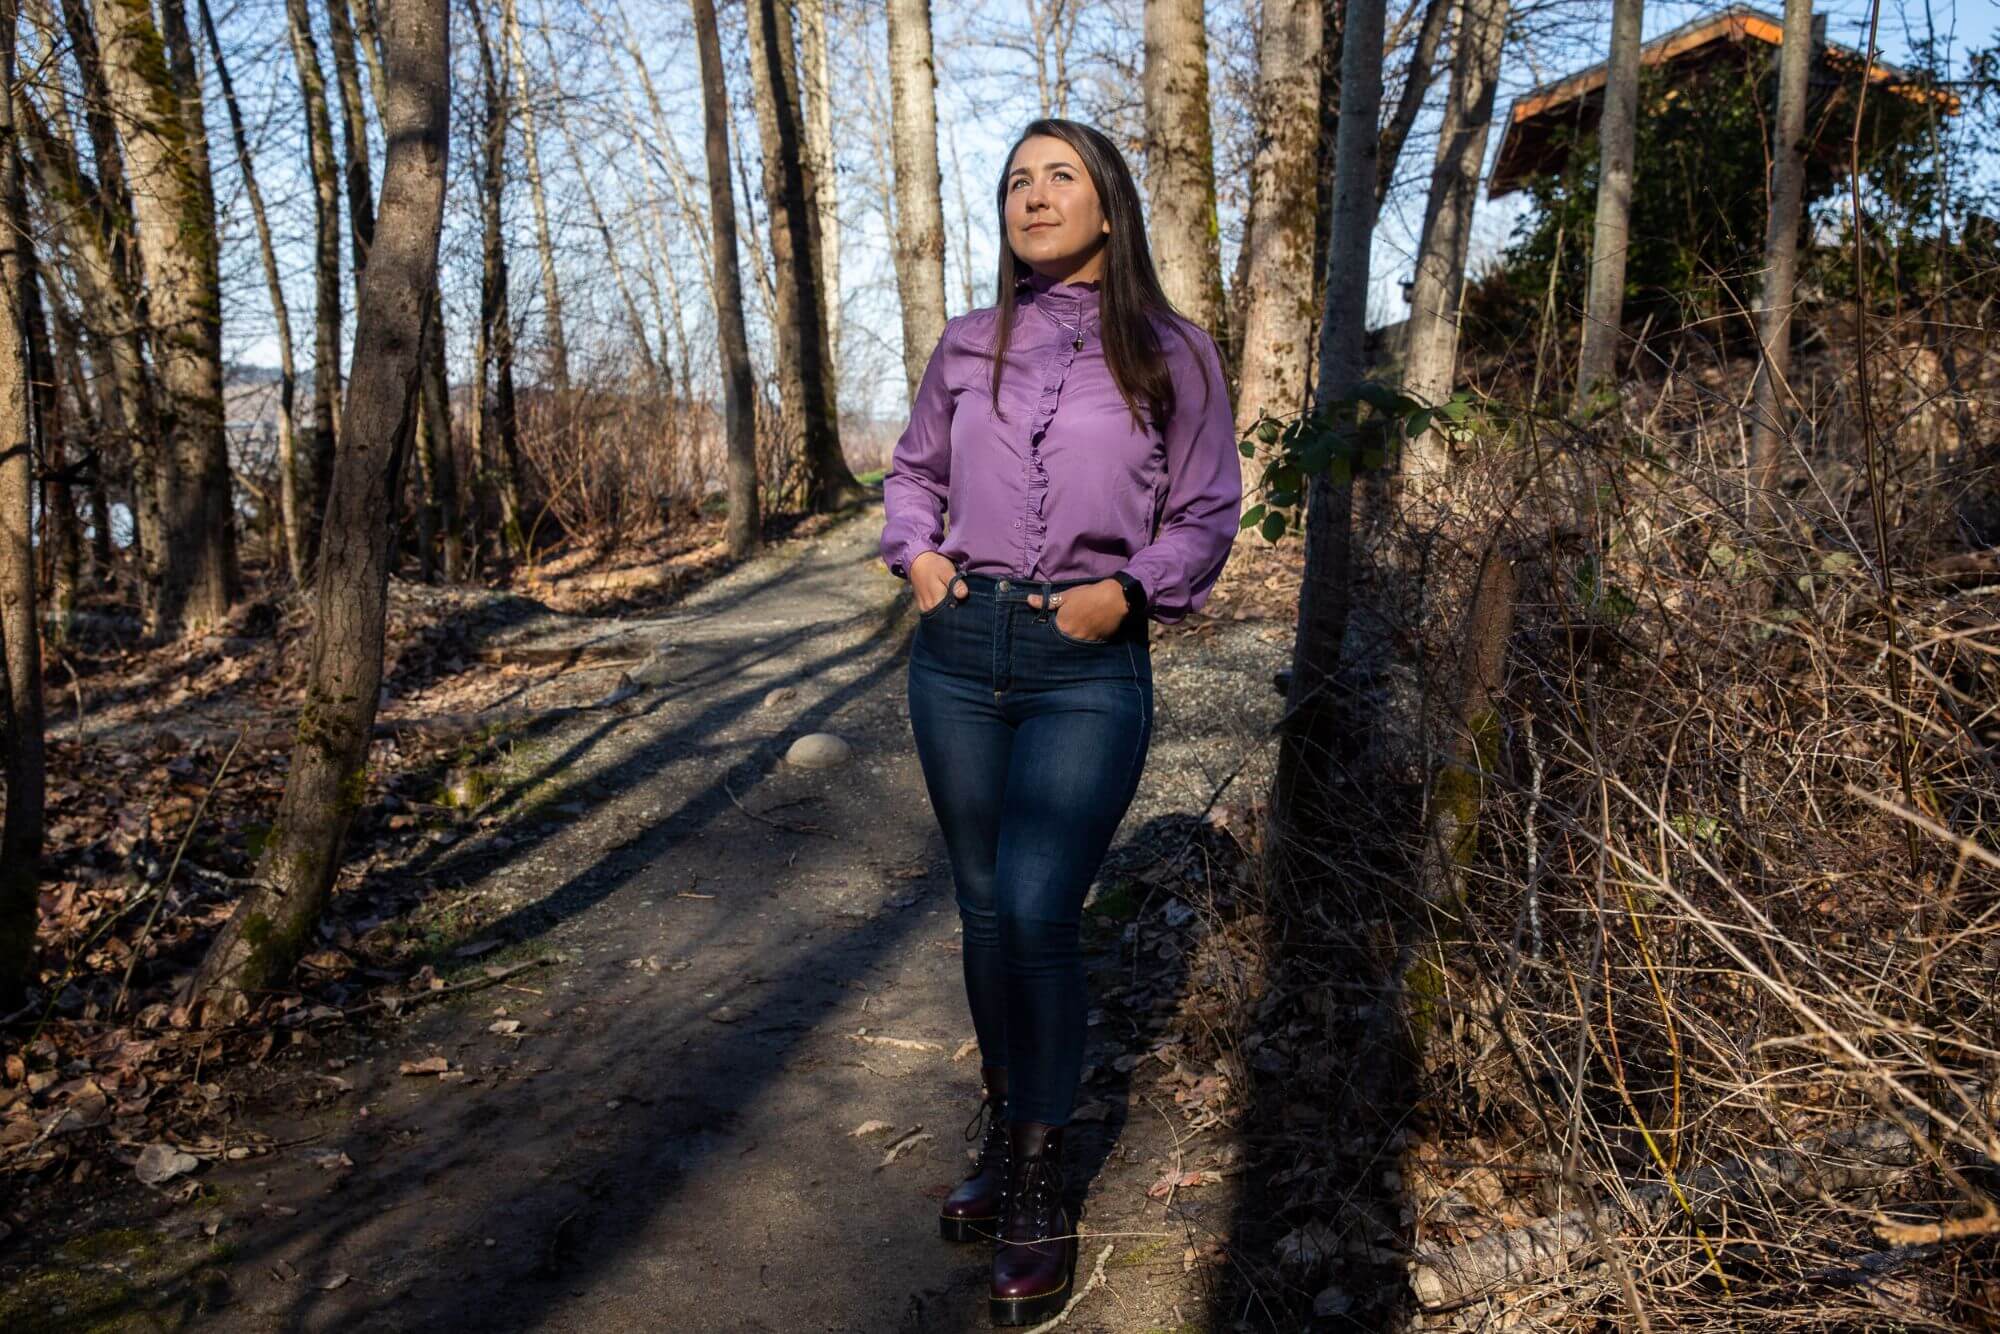 A person stands in the middle of a wooded area, wearing a pink blouse and dark jeans.